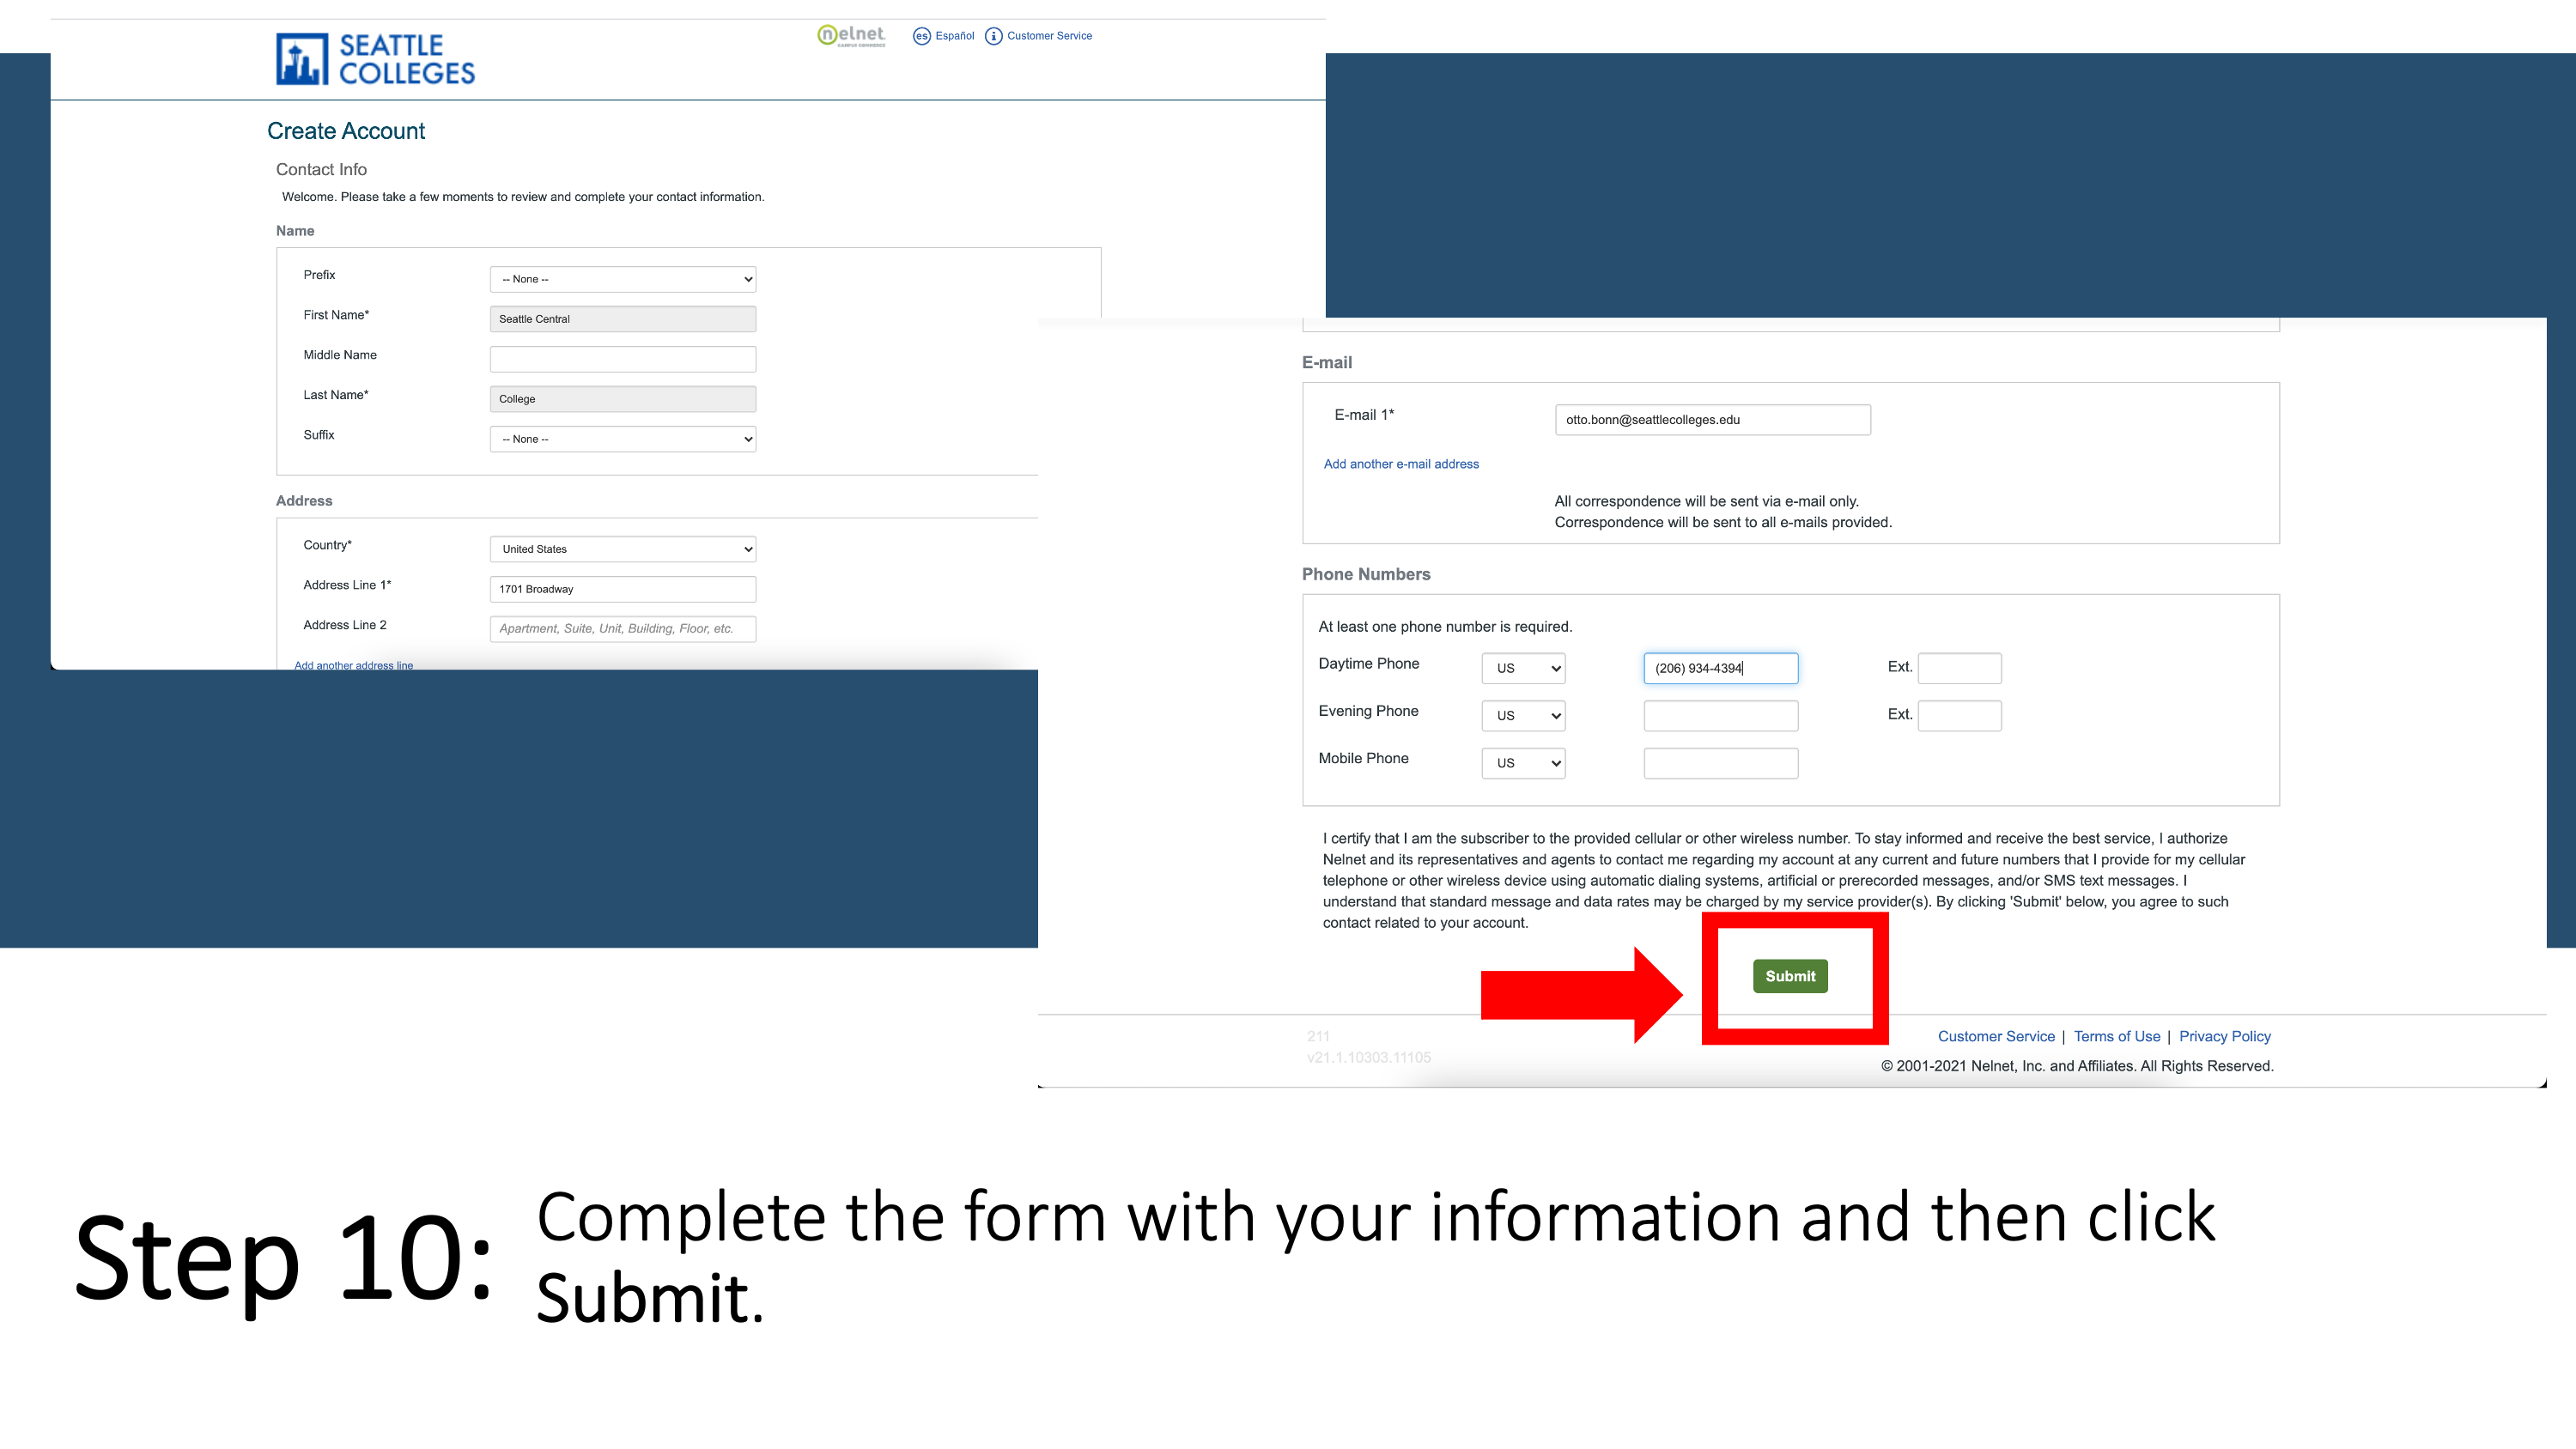 Complete the form with your information and then click Submit.